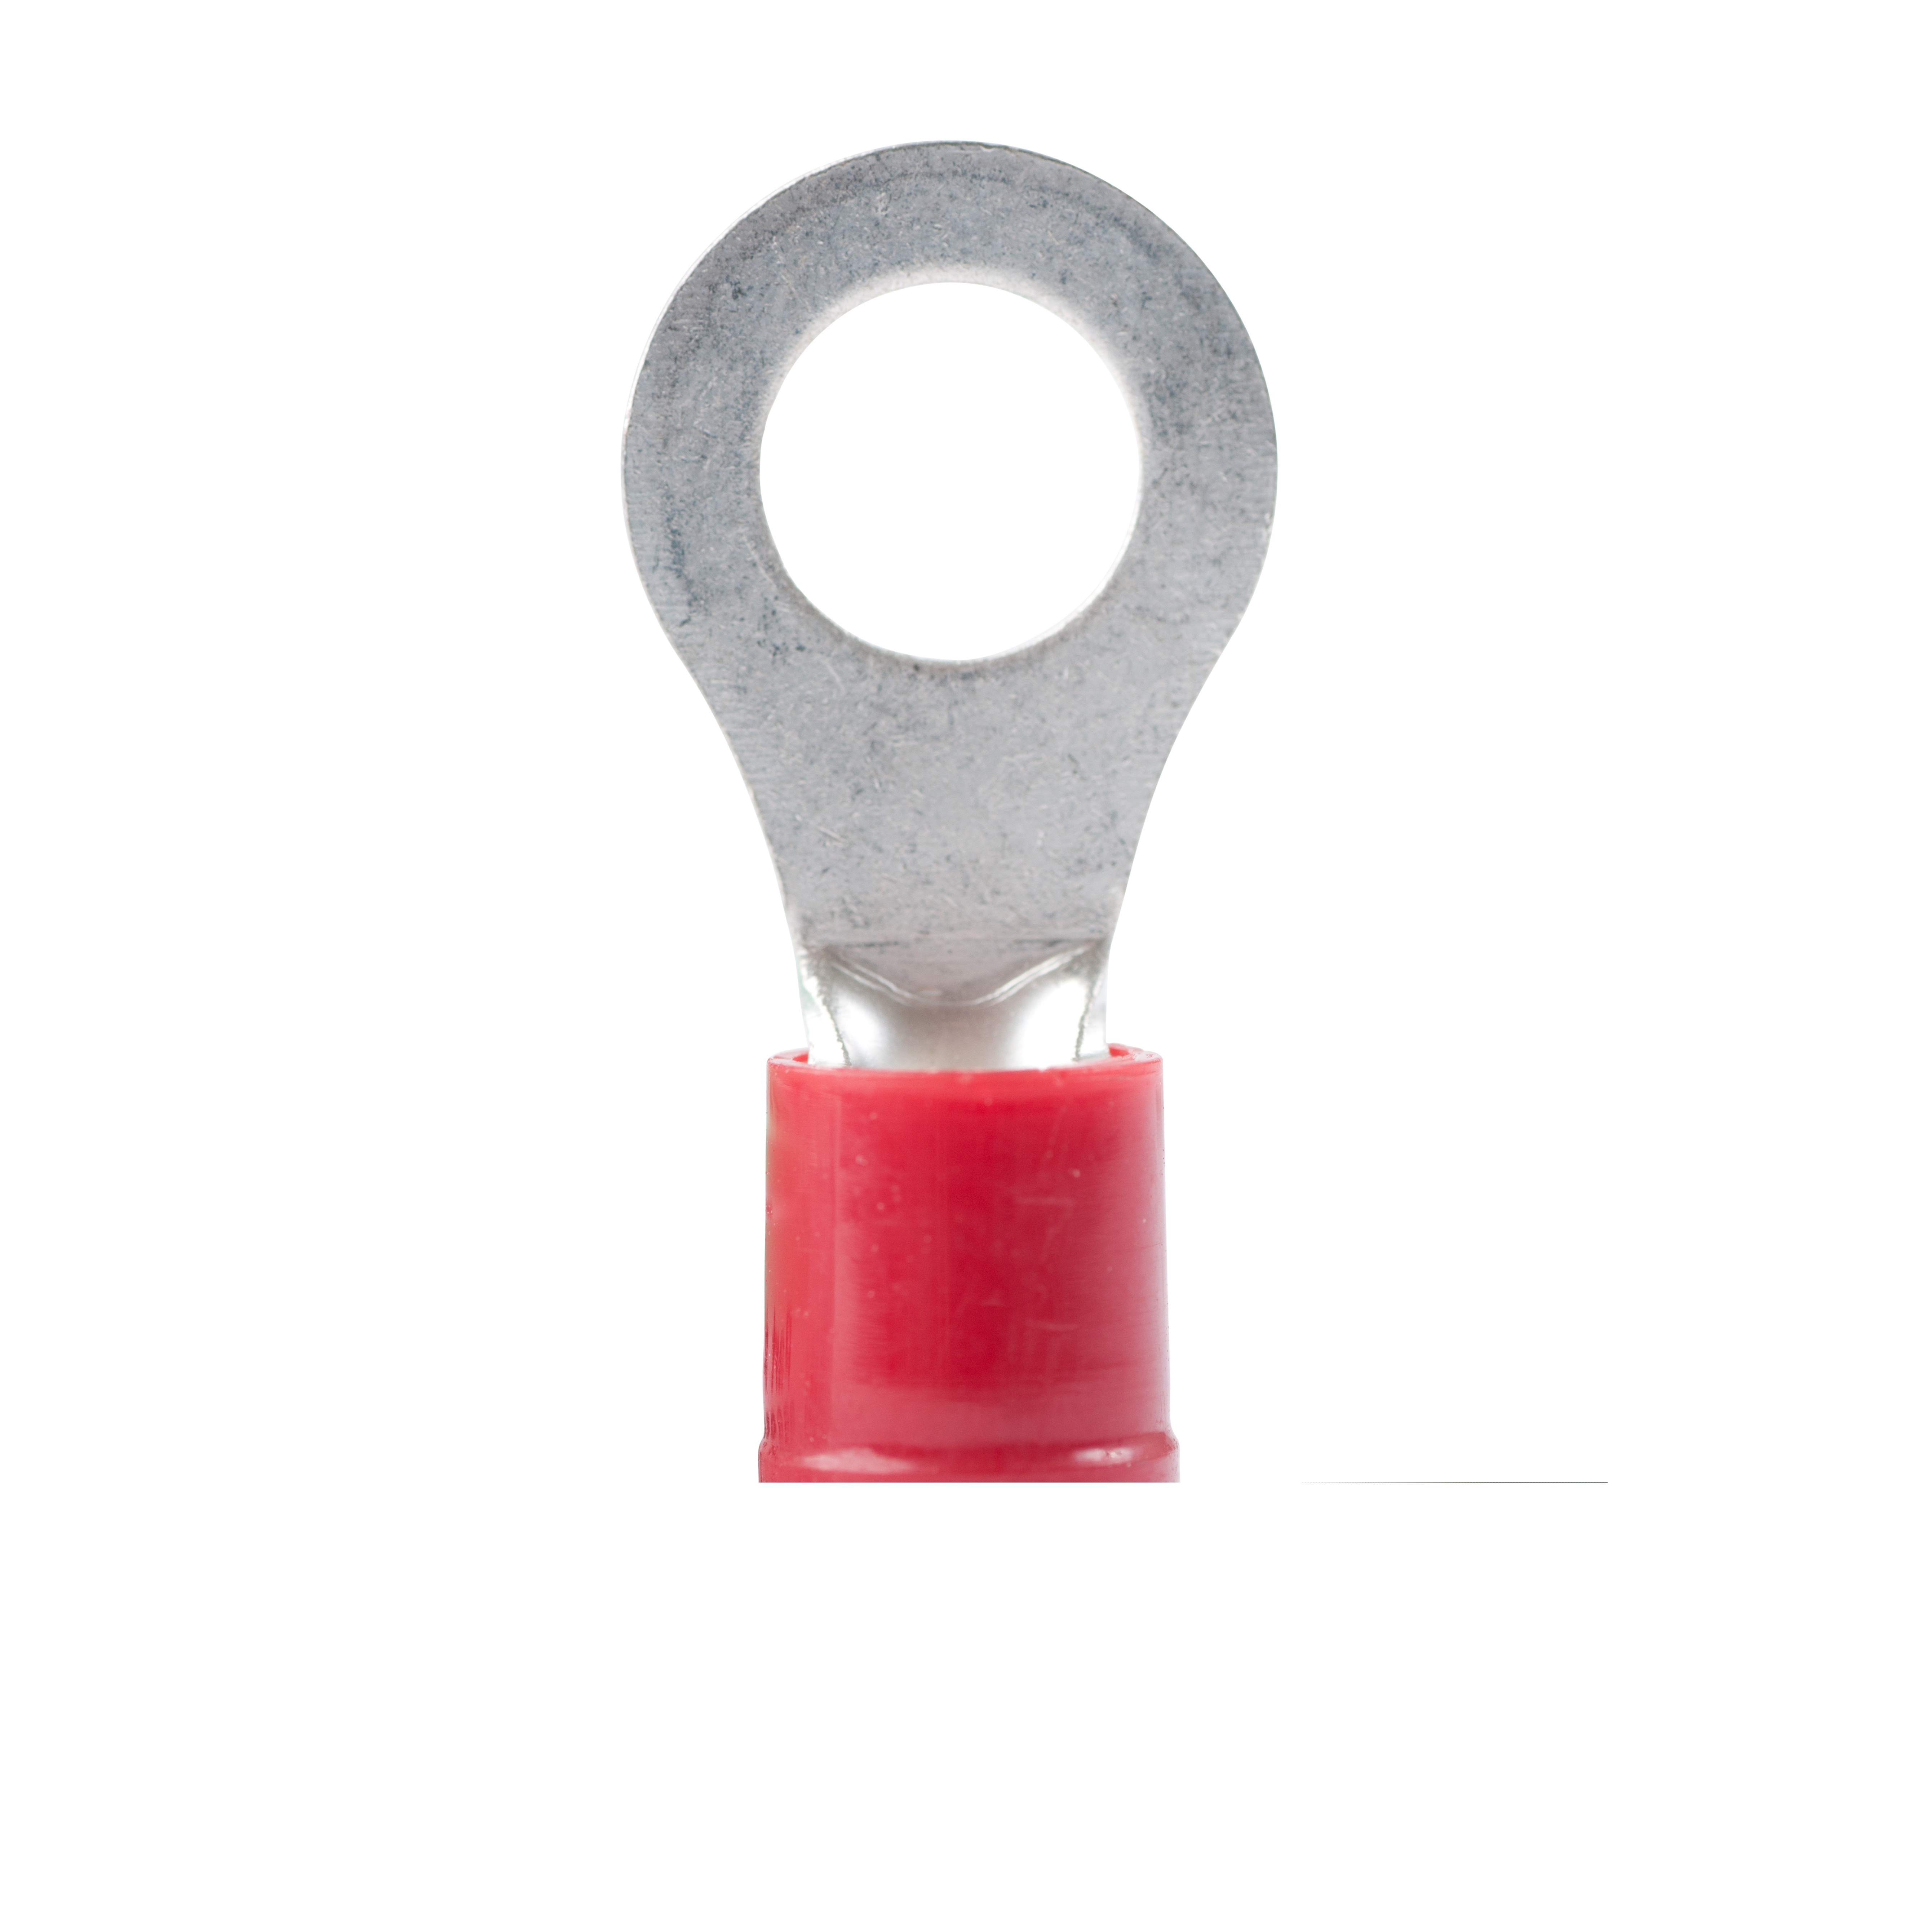 20-102 Ring Terminal, 600 V, 22 to 18 AWG Wire, #8 to 10 Stud, Vinyl Insulation, Copper Contact, Red